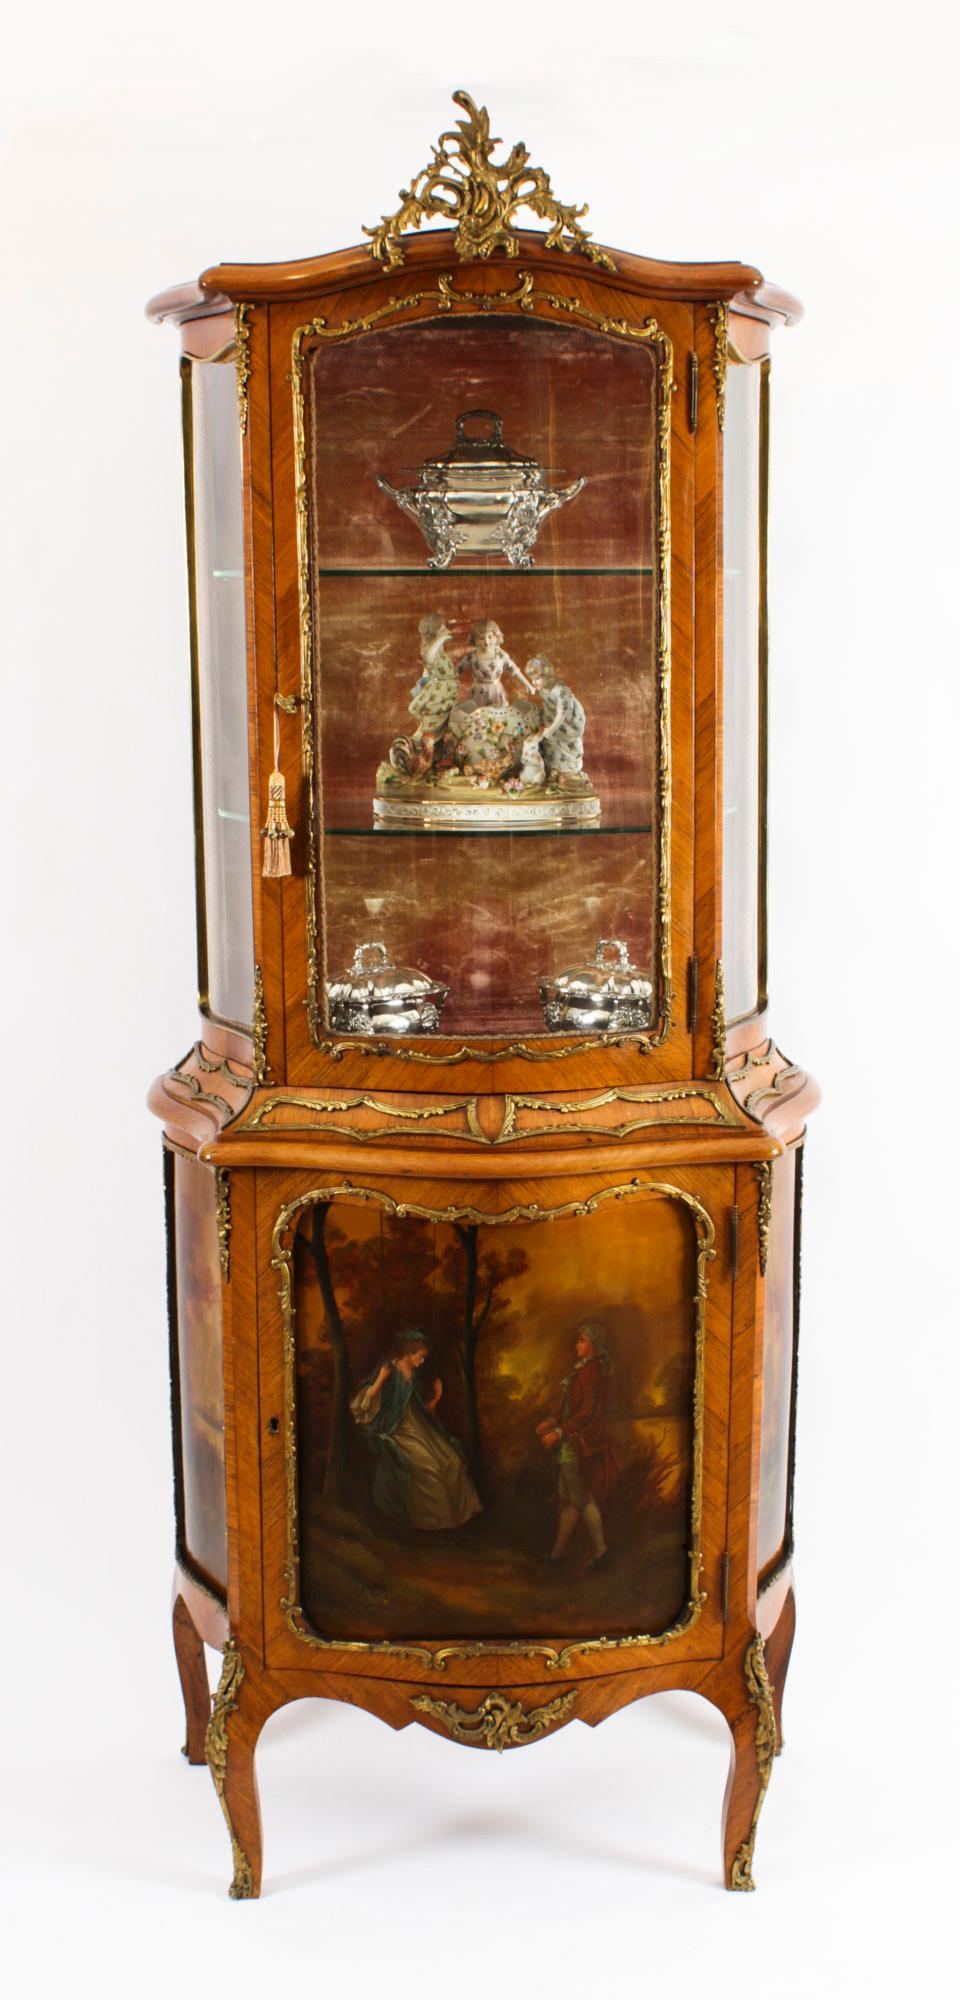 This is a stunning antique French wood and Vernis Martin vitrine cabinet, in the Louis XV manner, Circa 1880 in date, with exquisite hand painted decoration and exquisite ormolu mounts.

The top has serpentine glass sides with a central bow glazed